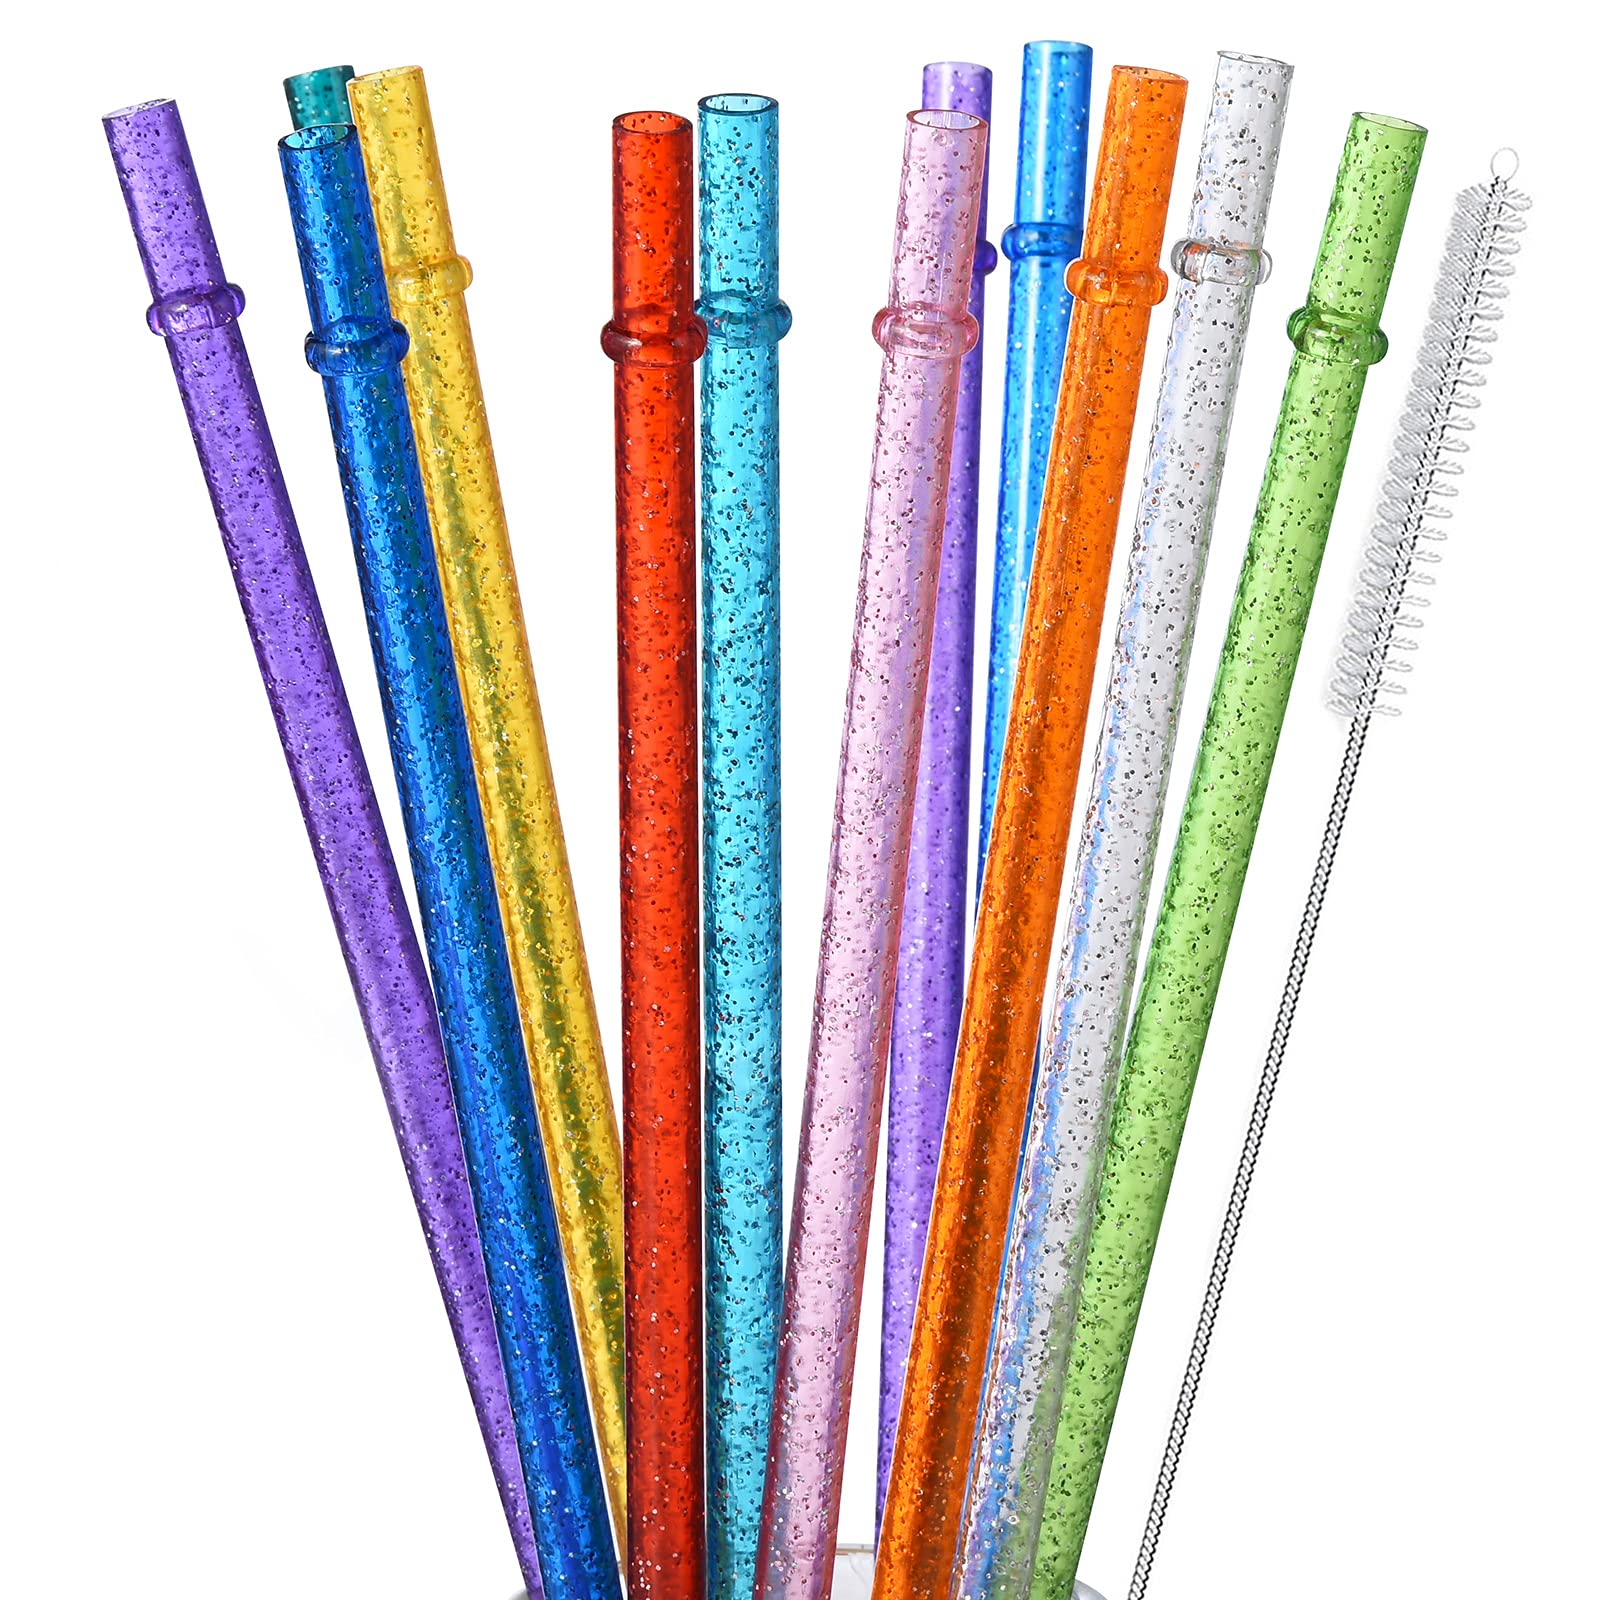 ALINK Reusable Glass Straws, 12 Pack, 8.5 inch x 10 mm